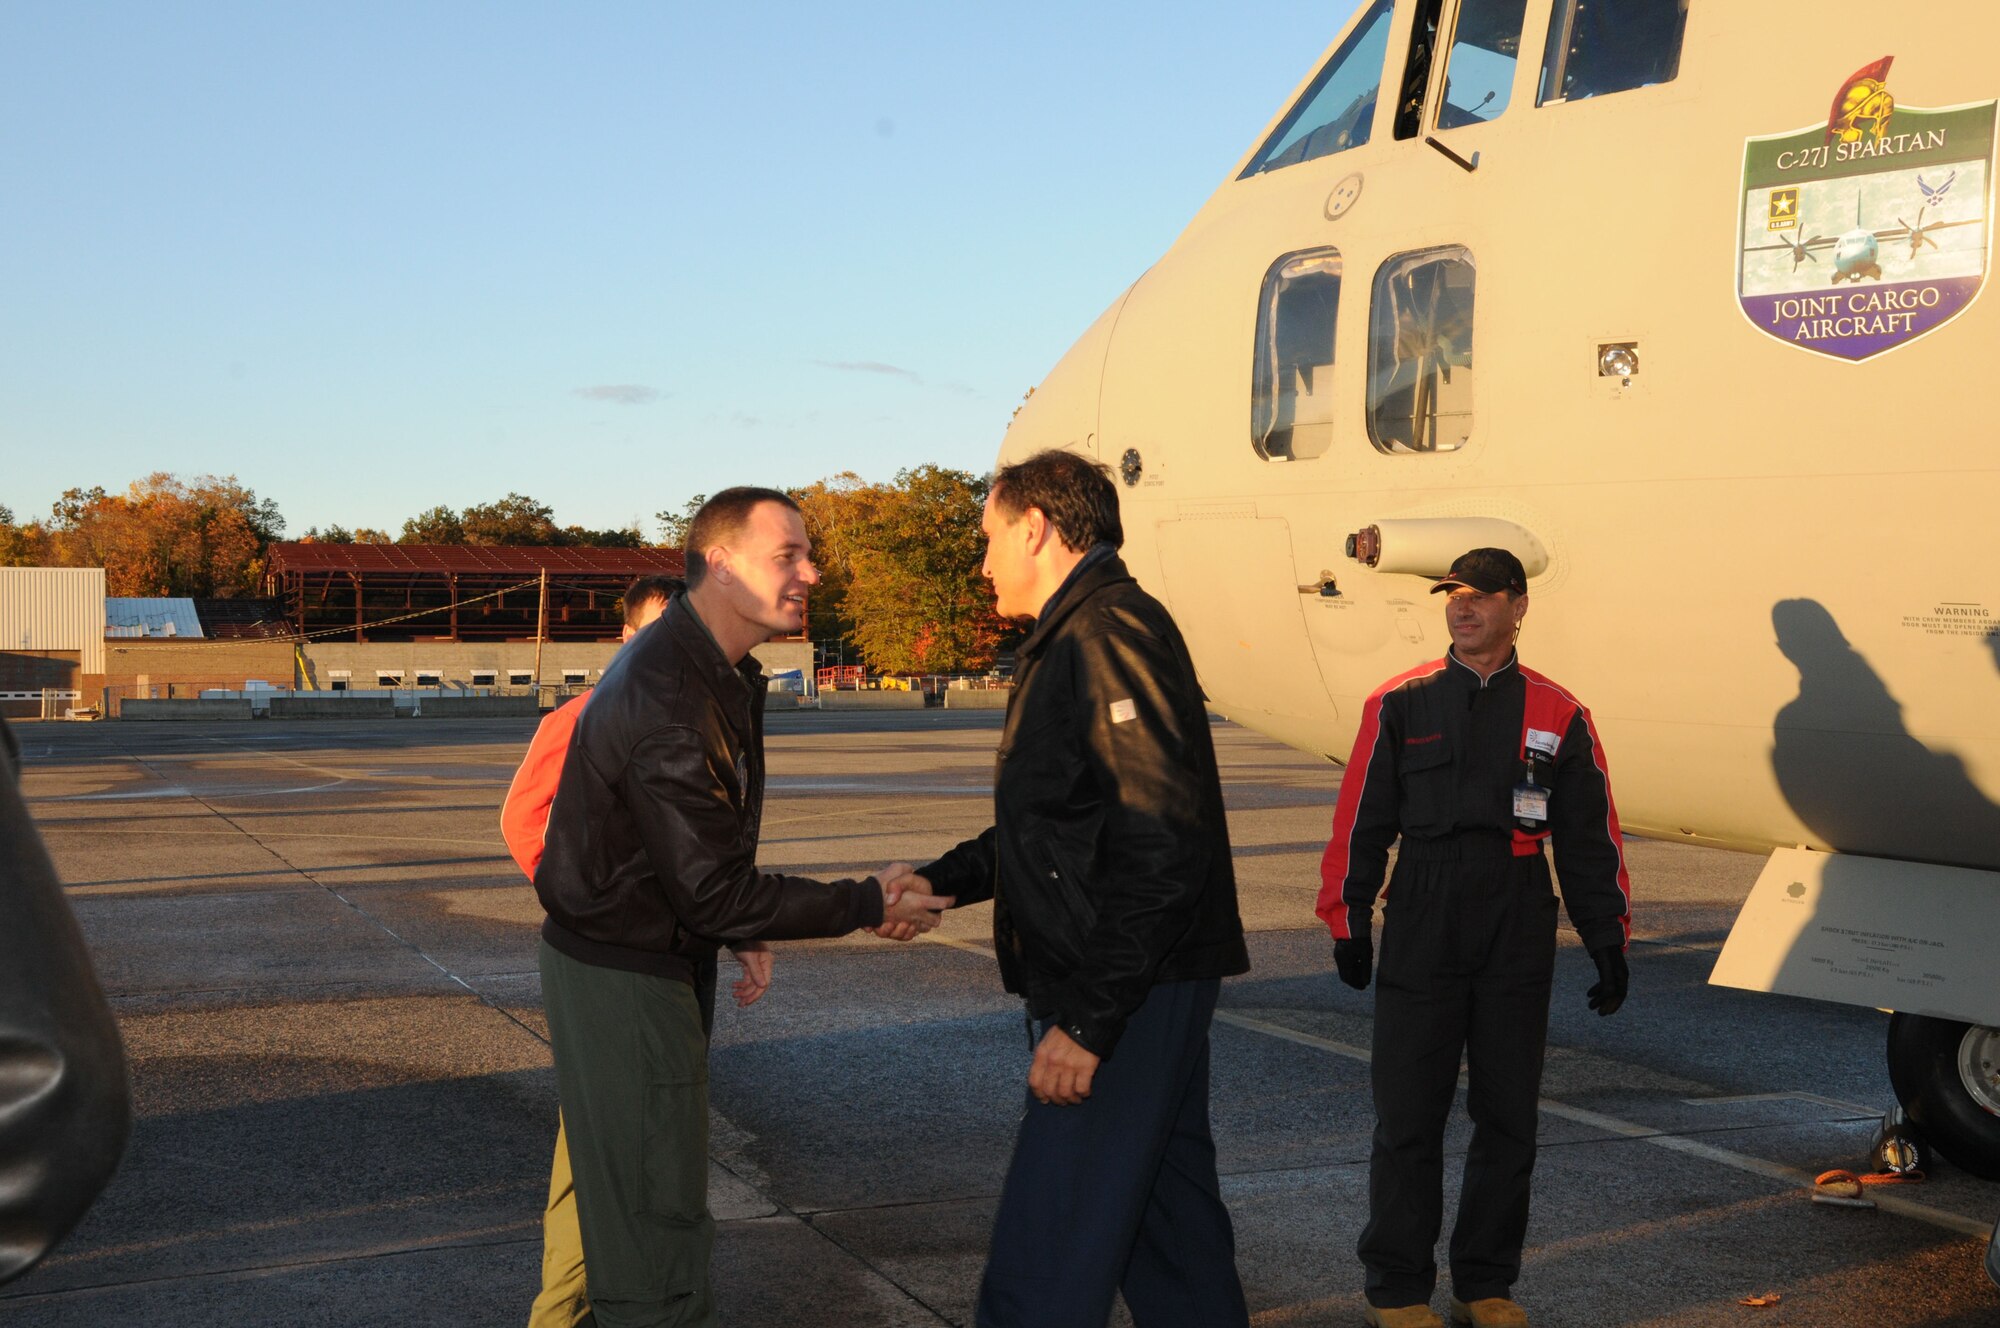 Colonel Frank Detorie (left), Commander, 103rd Airlift Wing, greets representatives of Alenia Aeronautica as they arrive in a C27J Spartan to Bradley Air National Guard Base in East Granby, Conn. on Thursday, Oct. 21, 2010.  The visit by the Italian manufacturer, which featured a familiarization tour of the aircraft, afforded the Flying Yankees of the 103rd Airlift Wing an opportunity to experience its future mission capabilities first hand.  (U.S. Air Force photo by Tech. Sgt. Erin E. McNamara)